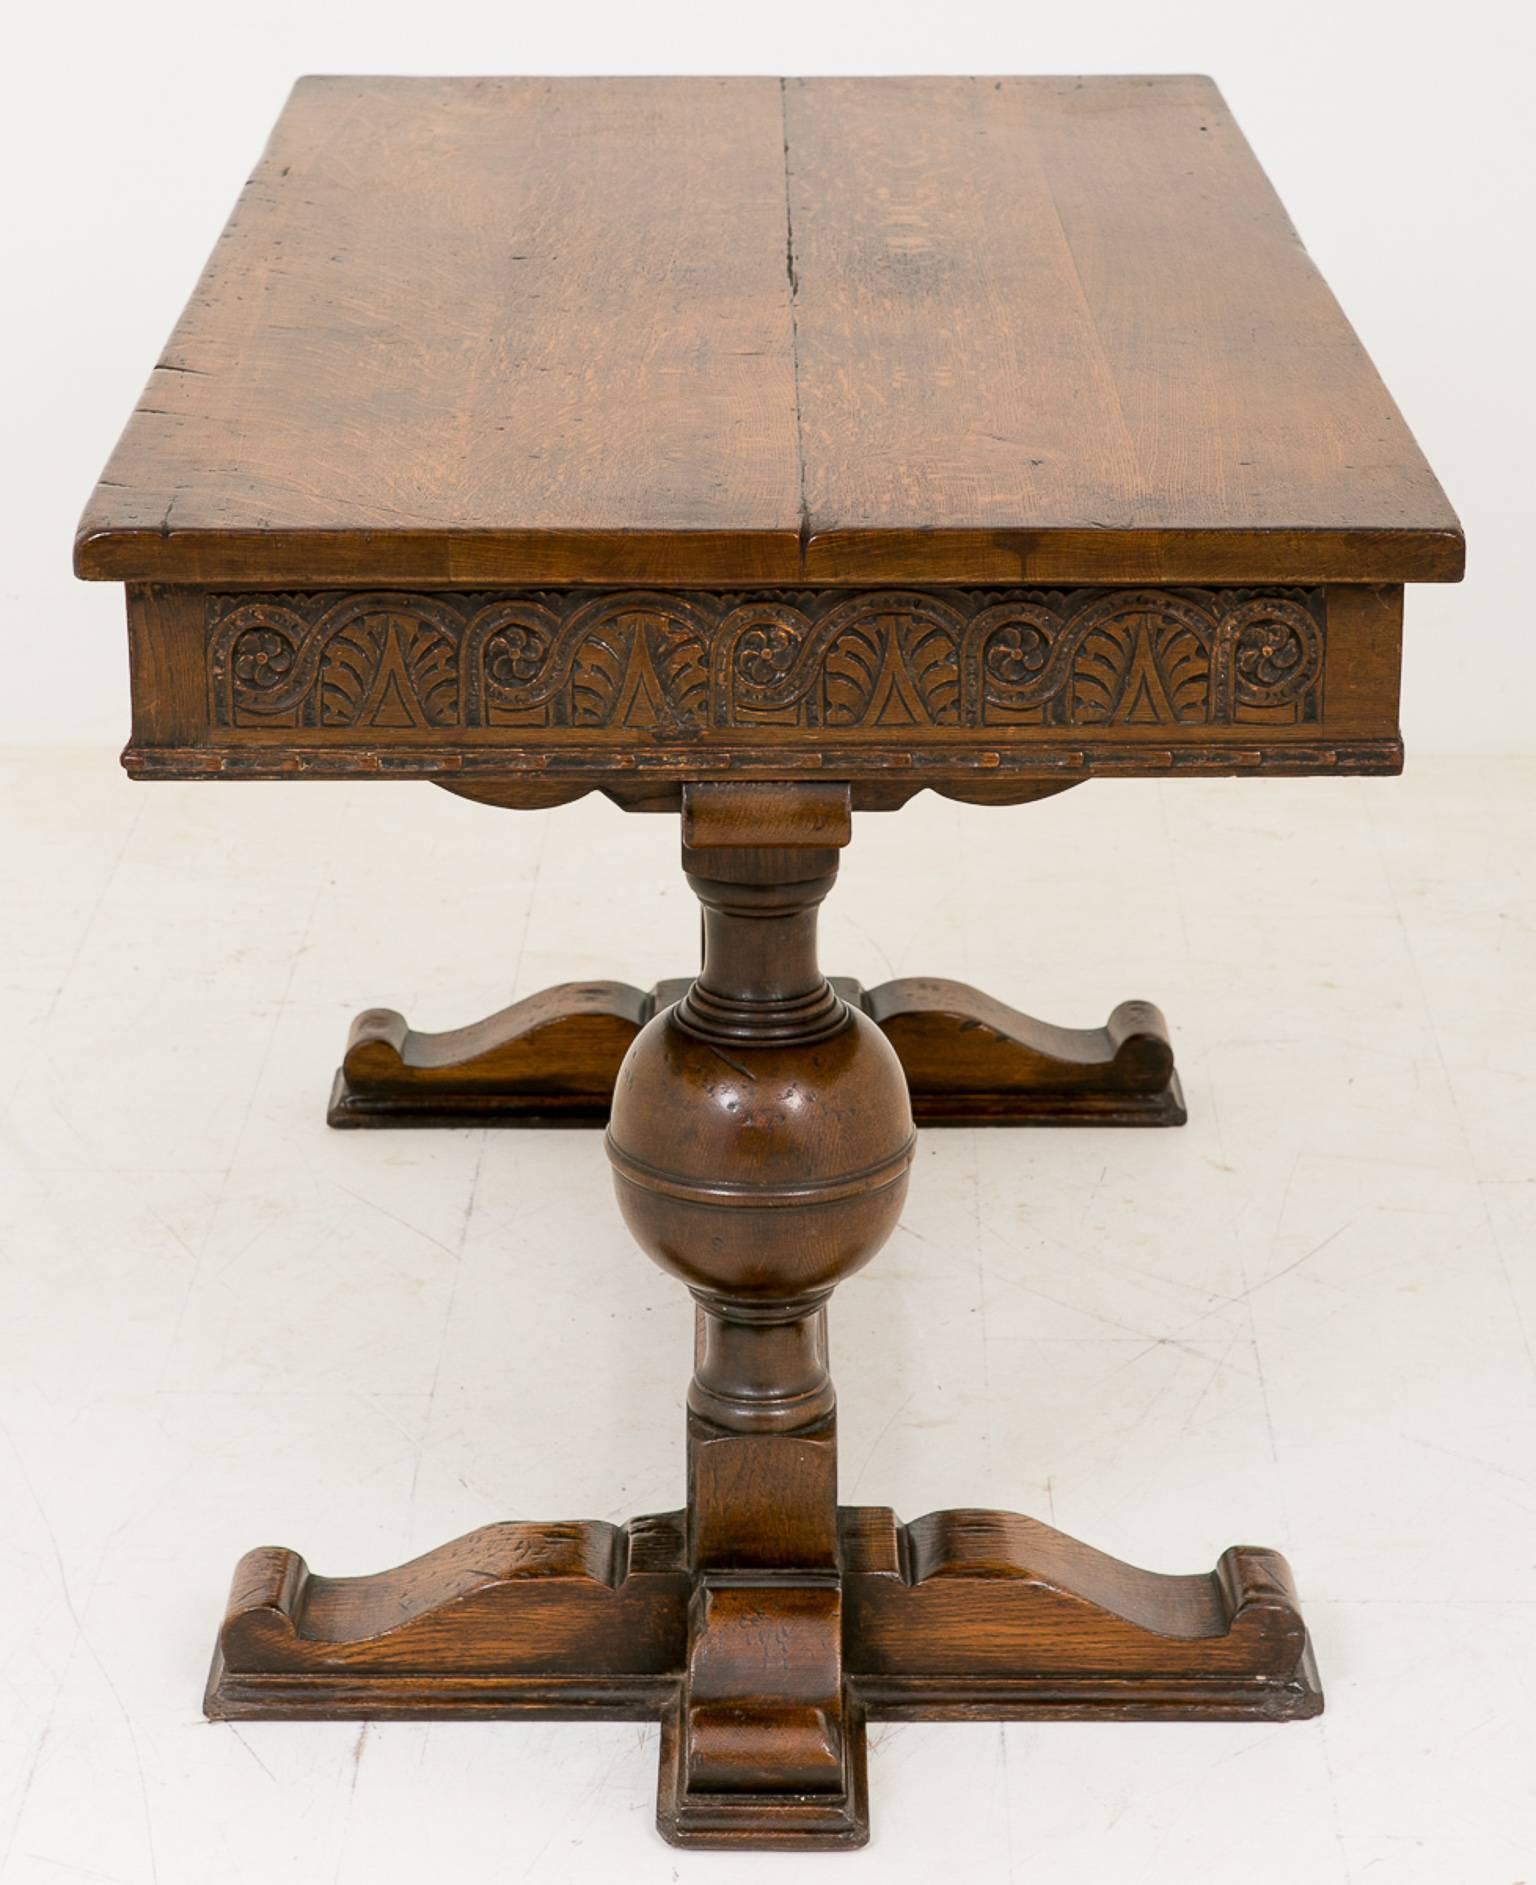 Jacobean style carved oak two-drawer side table.
Featuring a cross section base with bulbous supports having two drawers above.
Adorned in carved decoration.

Size:
Width 58" (147cm)
Height 30" (76cm)
Depth 28" (71cm).